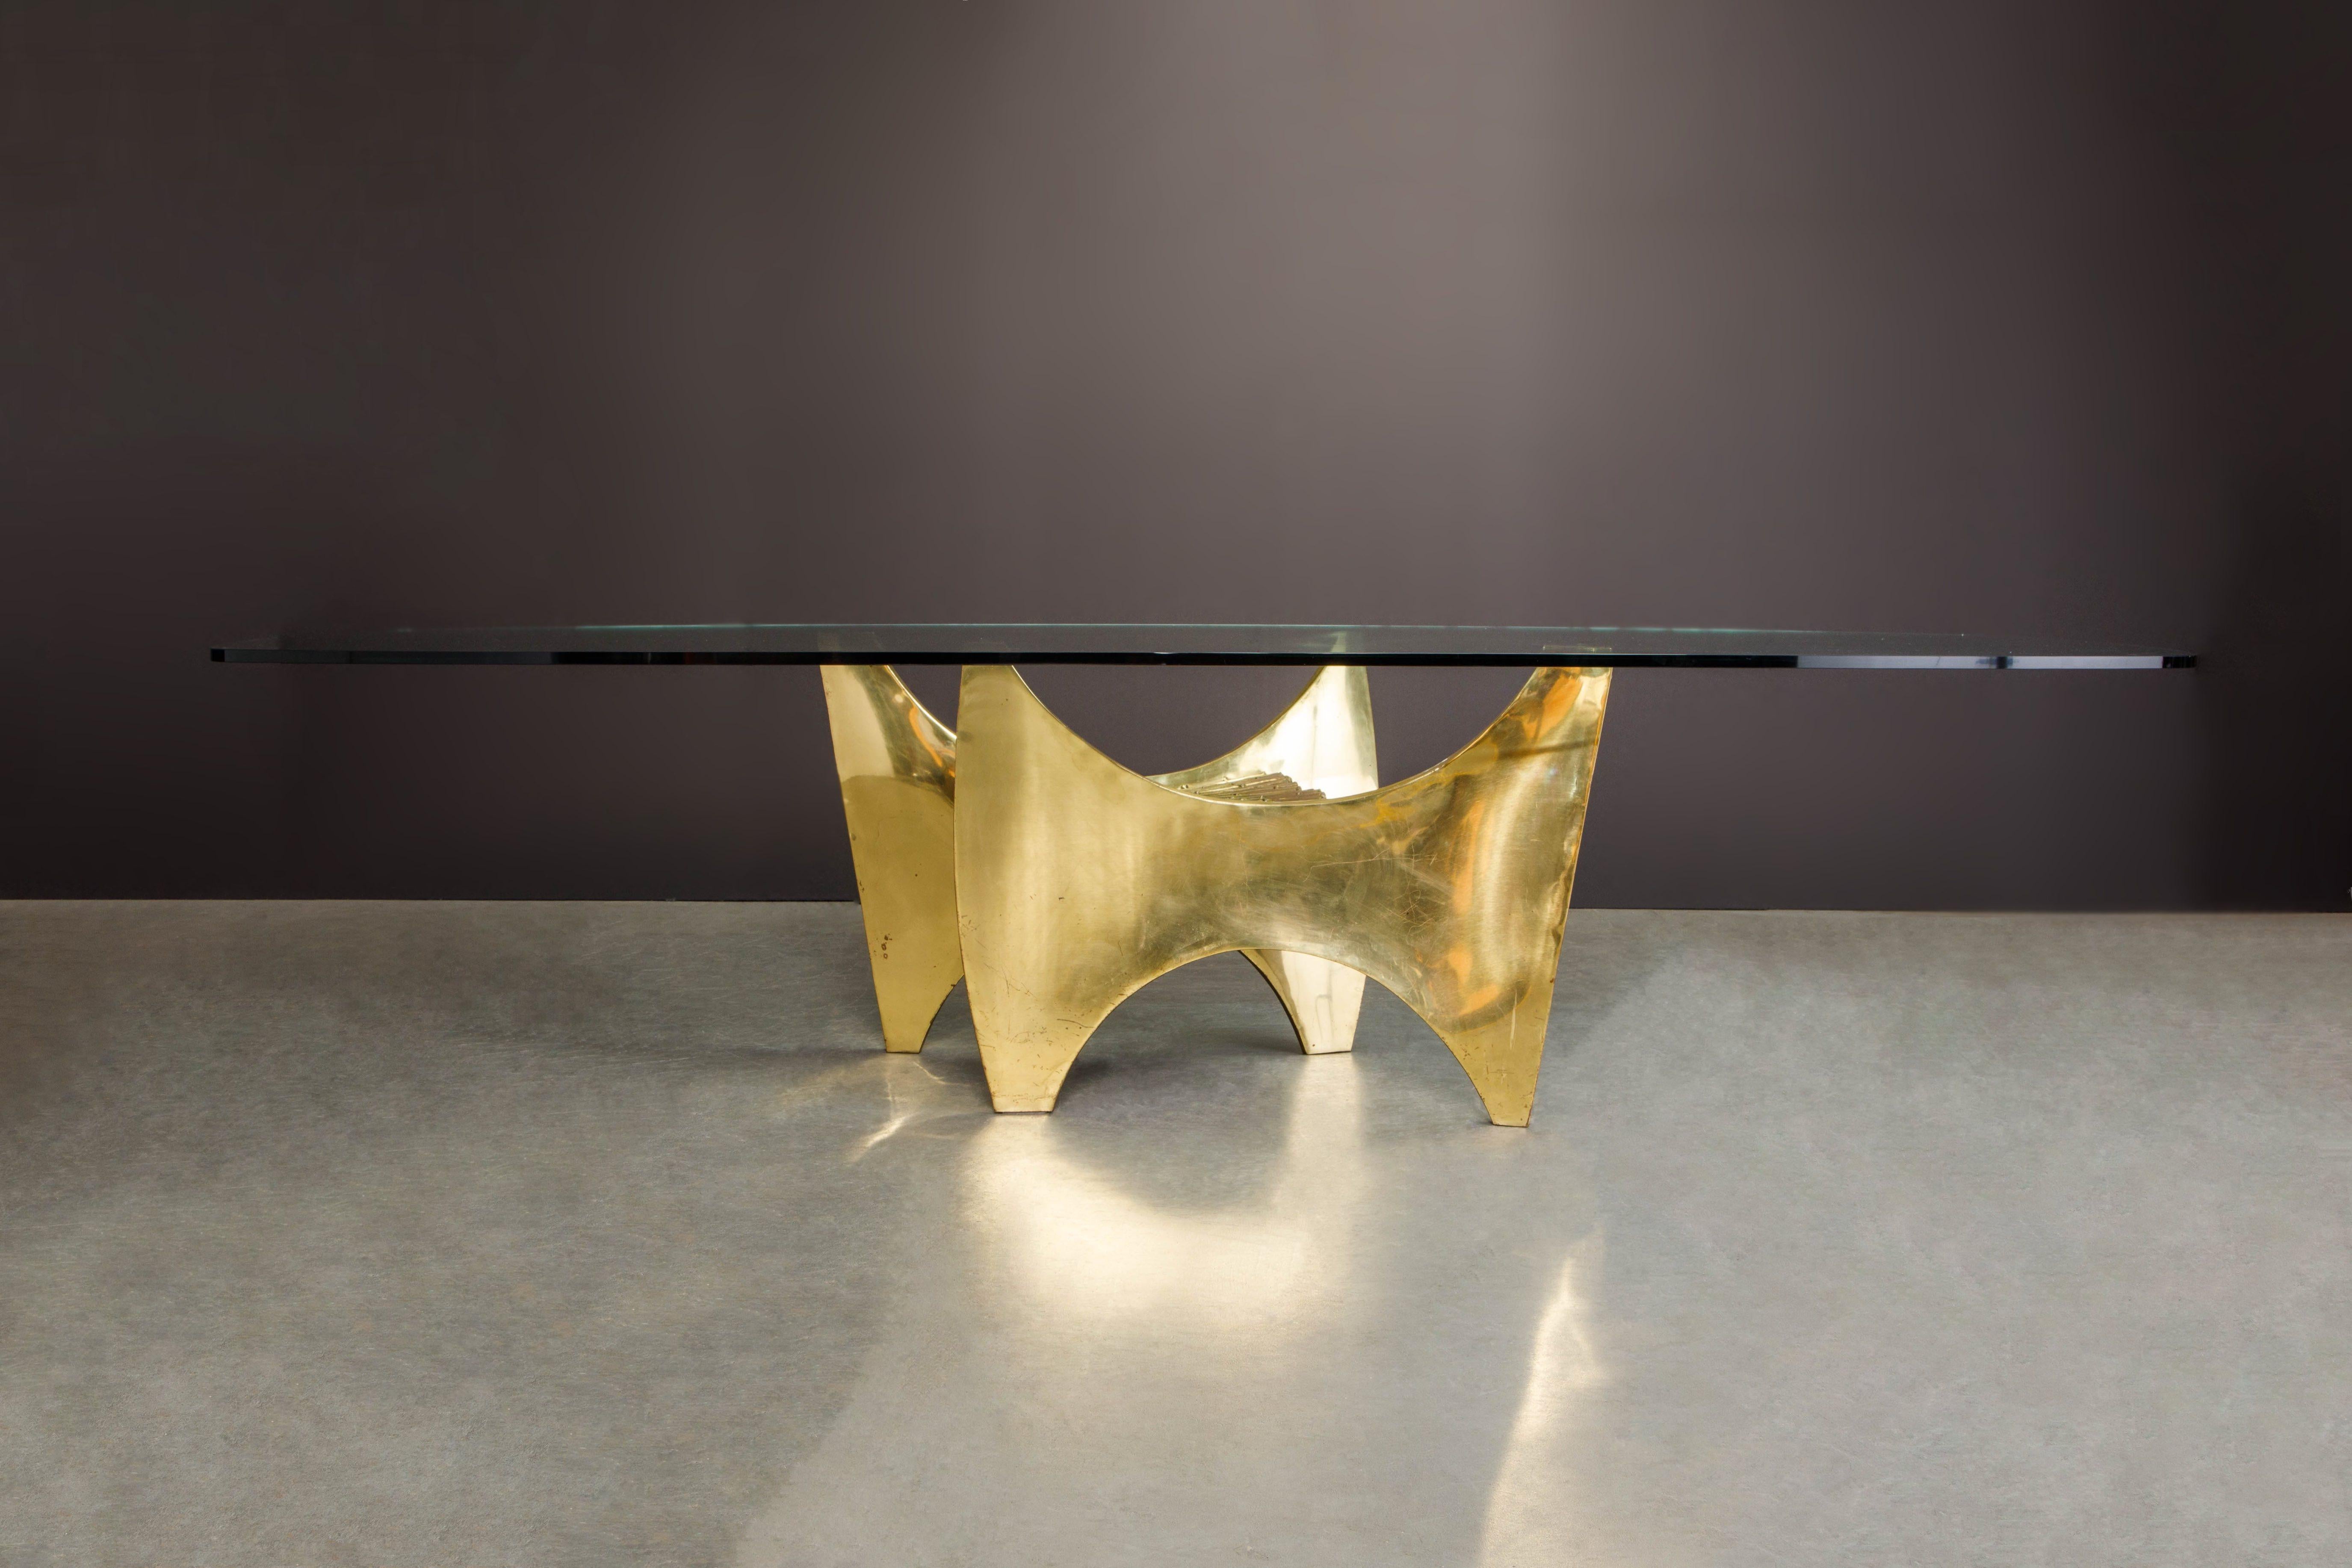 An extremely rare and coveted fine art sculpture which doubles as a dining table or conference table by French artist sculptor Claude Santarelli, signed 'SANTA' on the base as can be seen in the photo gallery of this listing.  This amazing sculpture